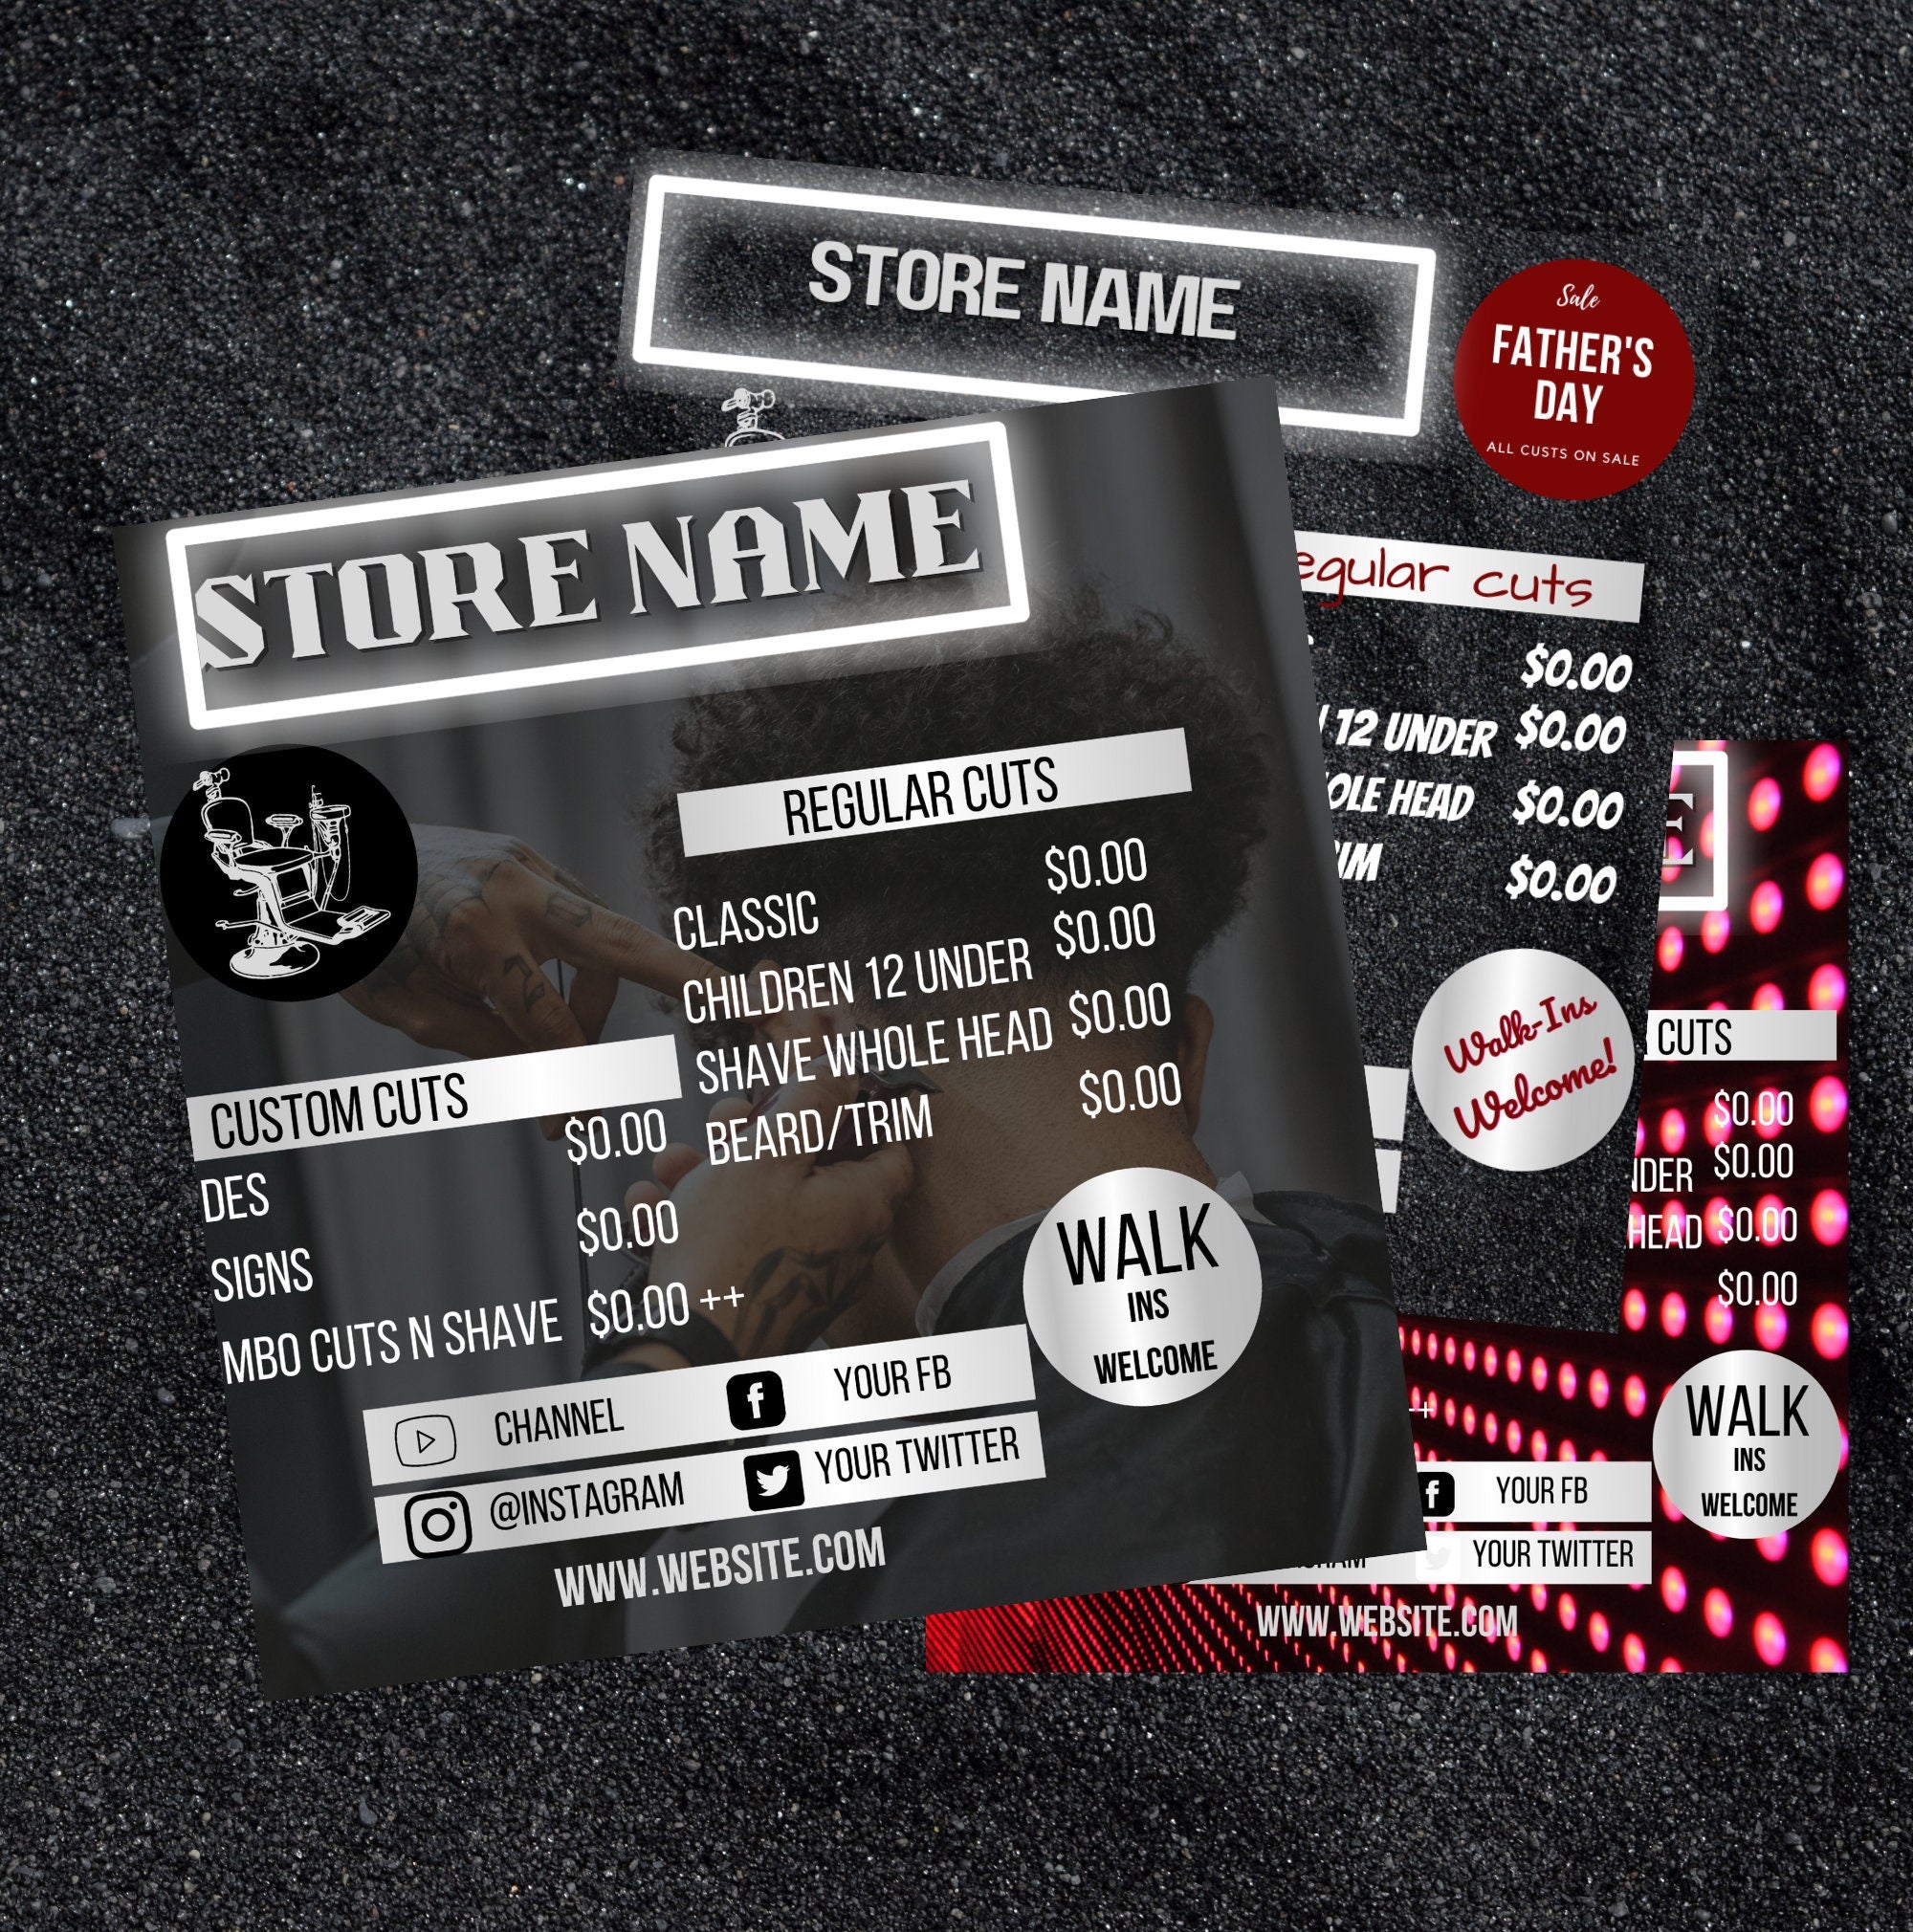 BARBER Shop Cuts Price List template Buy 1 get 2 free, Barber Flyer, diy , Pricelist Flyer, Haircut Flyer - Edit with Canva all 3 flyers